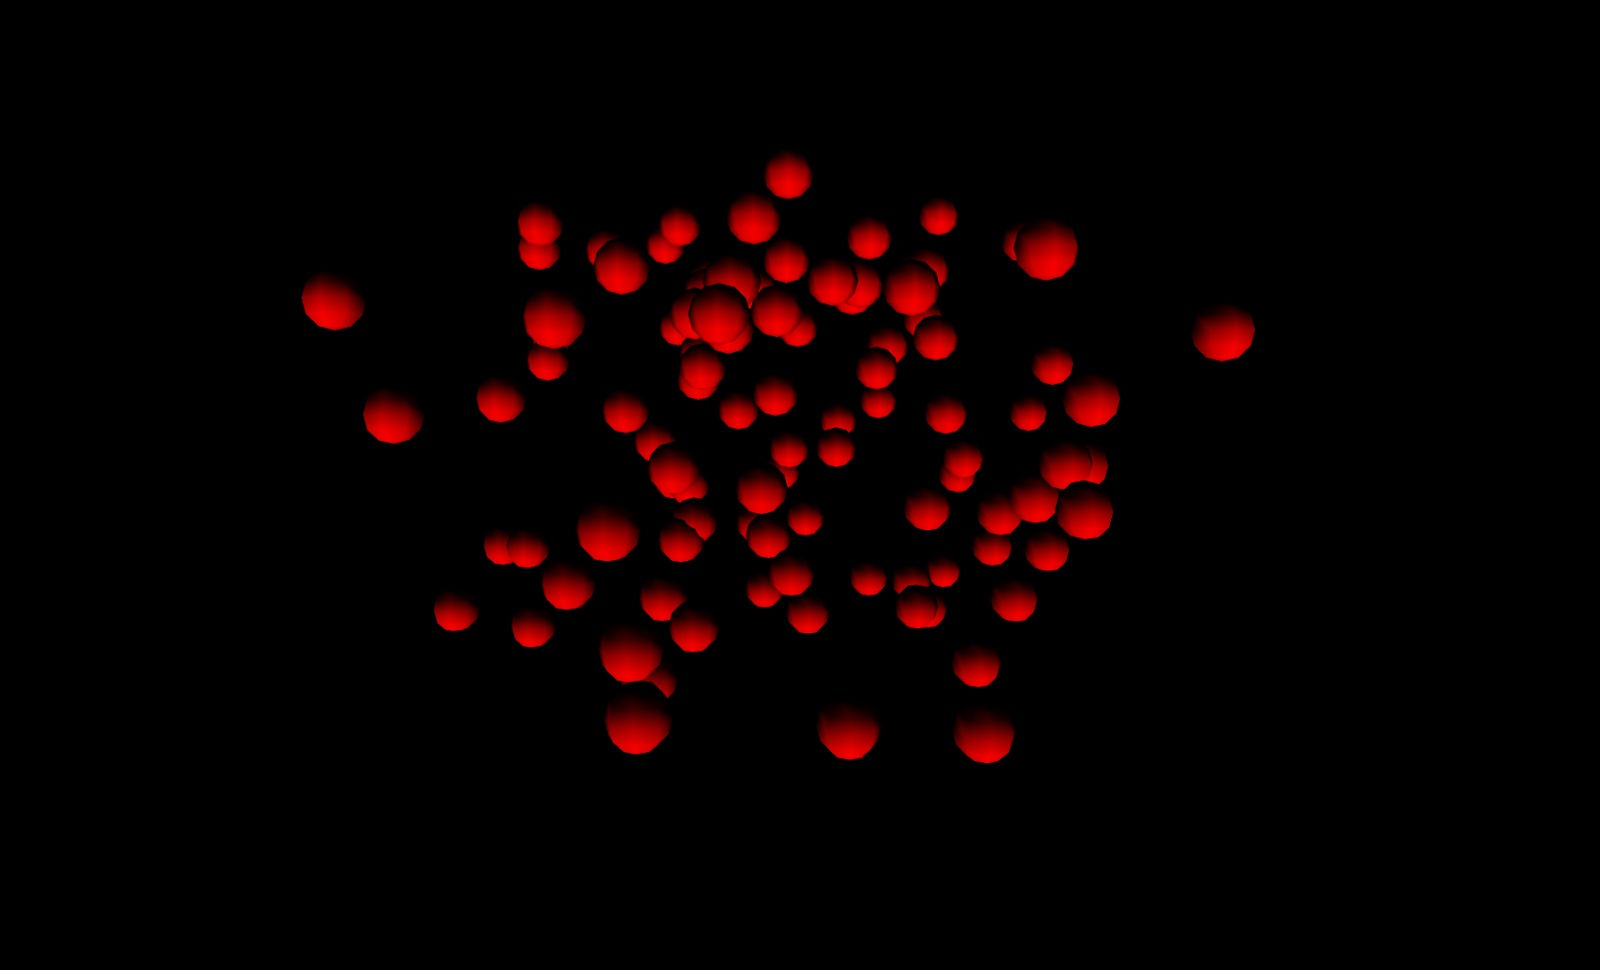 Particles as Spheres